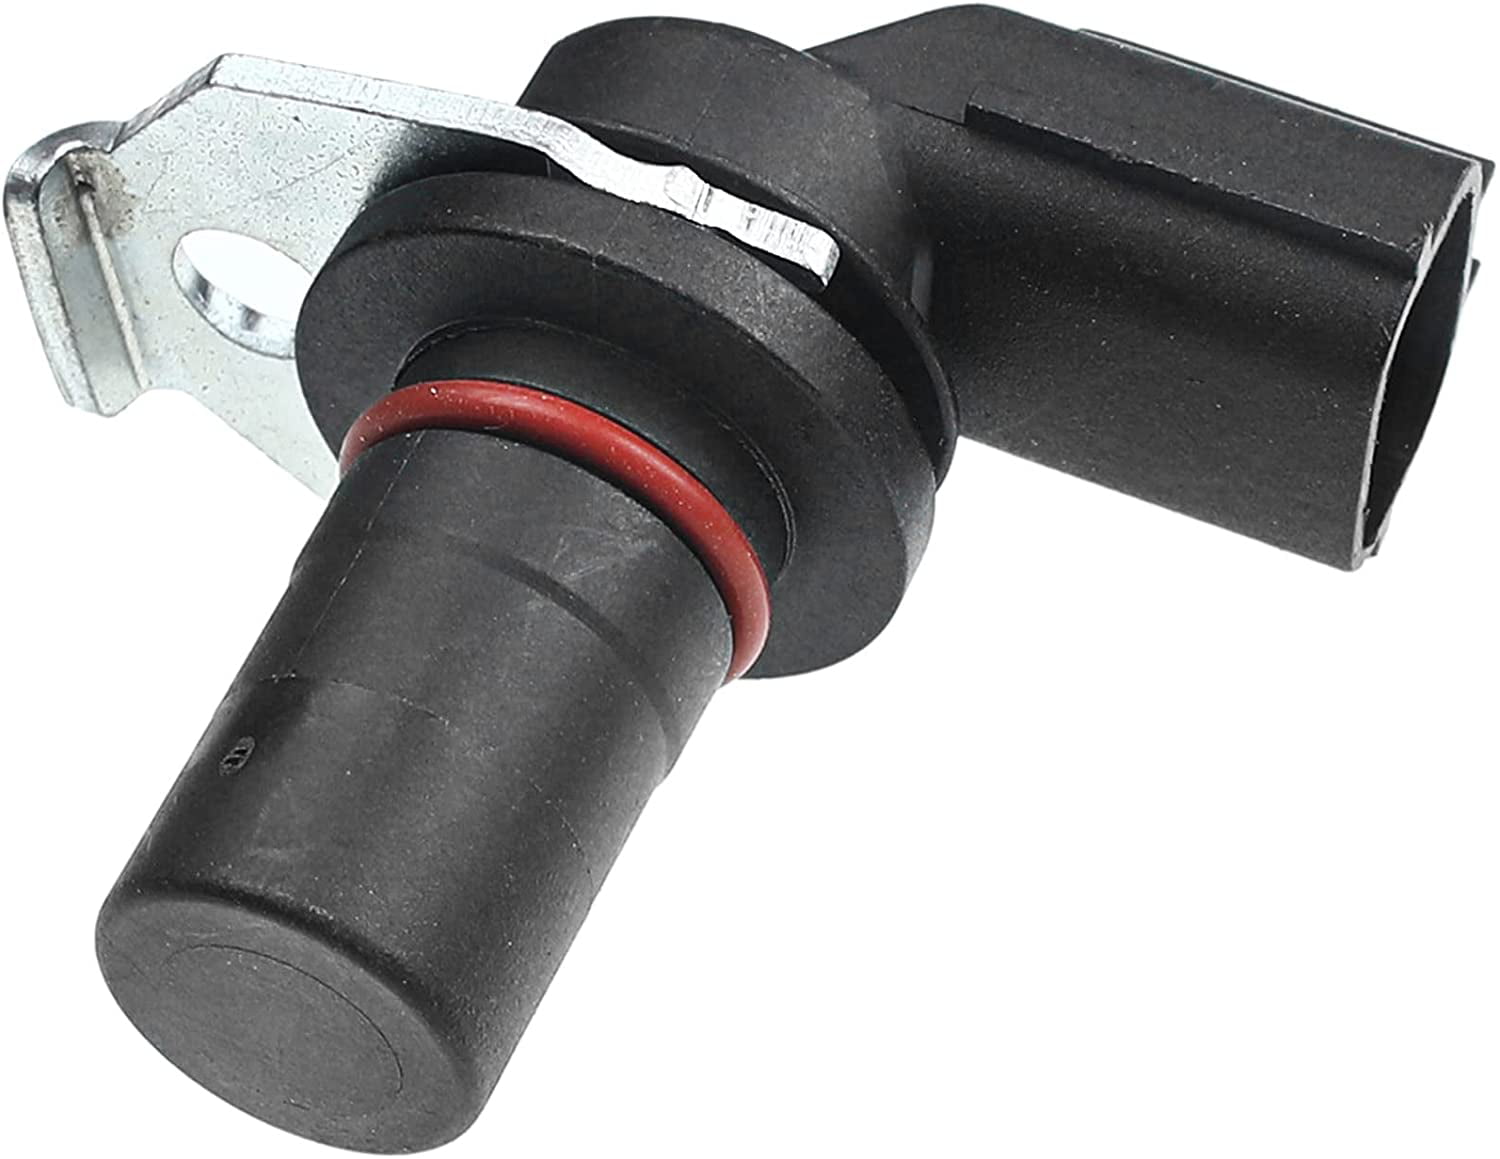 A-Premium Input Automatic Transmission Speed Sensor Compatible with Ford Focus 2000-2011 Transit Connect 2010-2013 